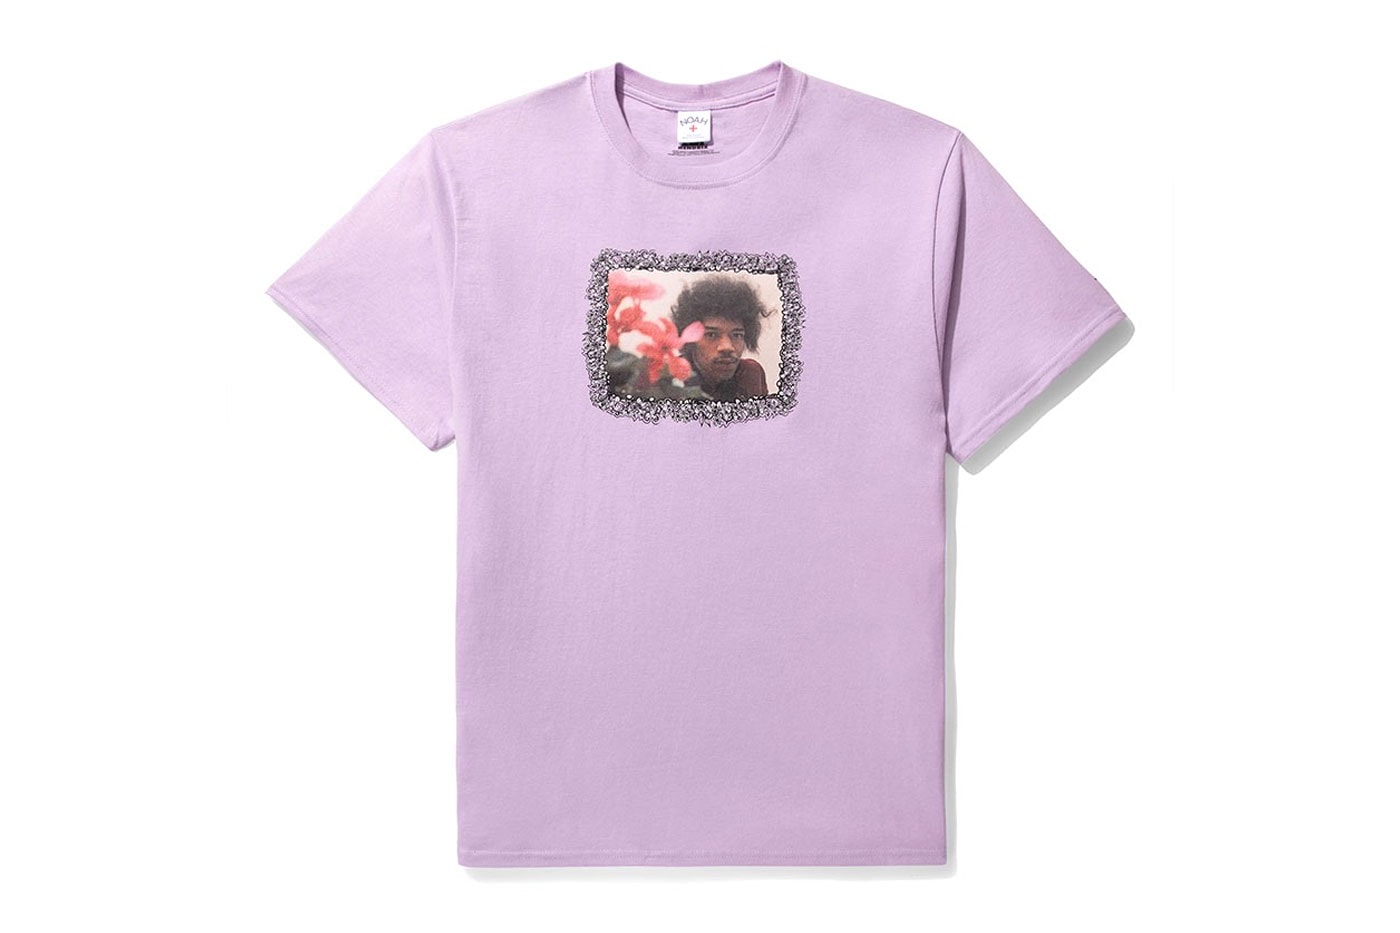 noah jimi hendrix tribute collection axis bold as love capsule collection are you experienced 5 types t shirts release info date clubhouse dover street market 